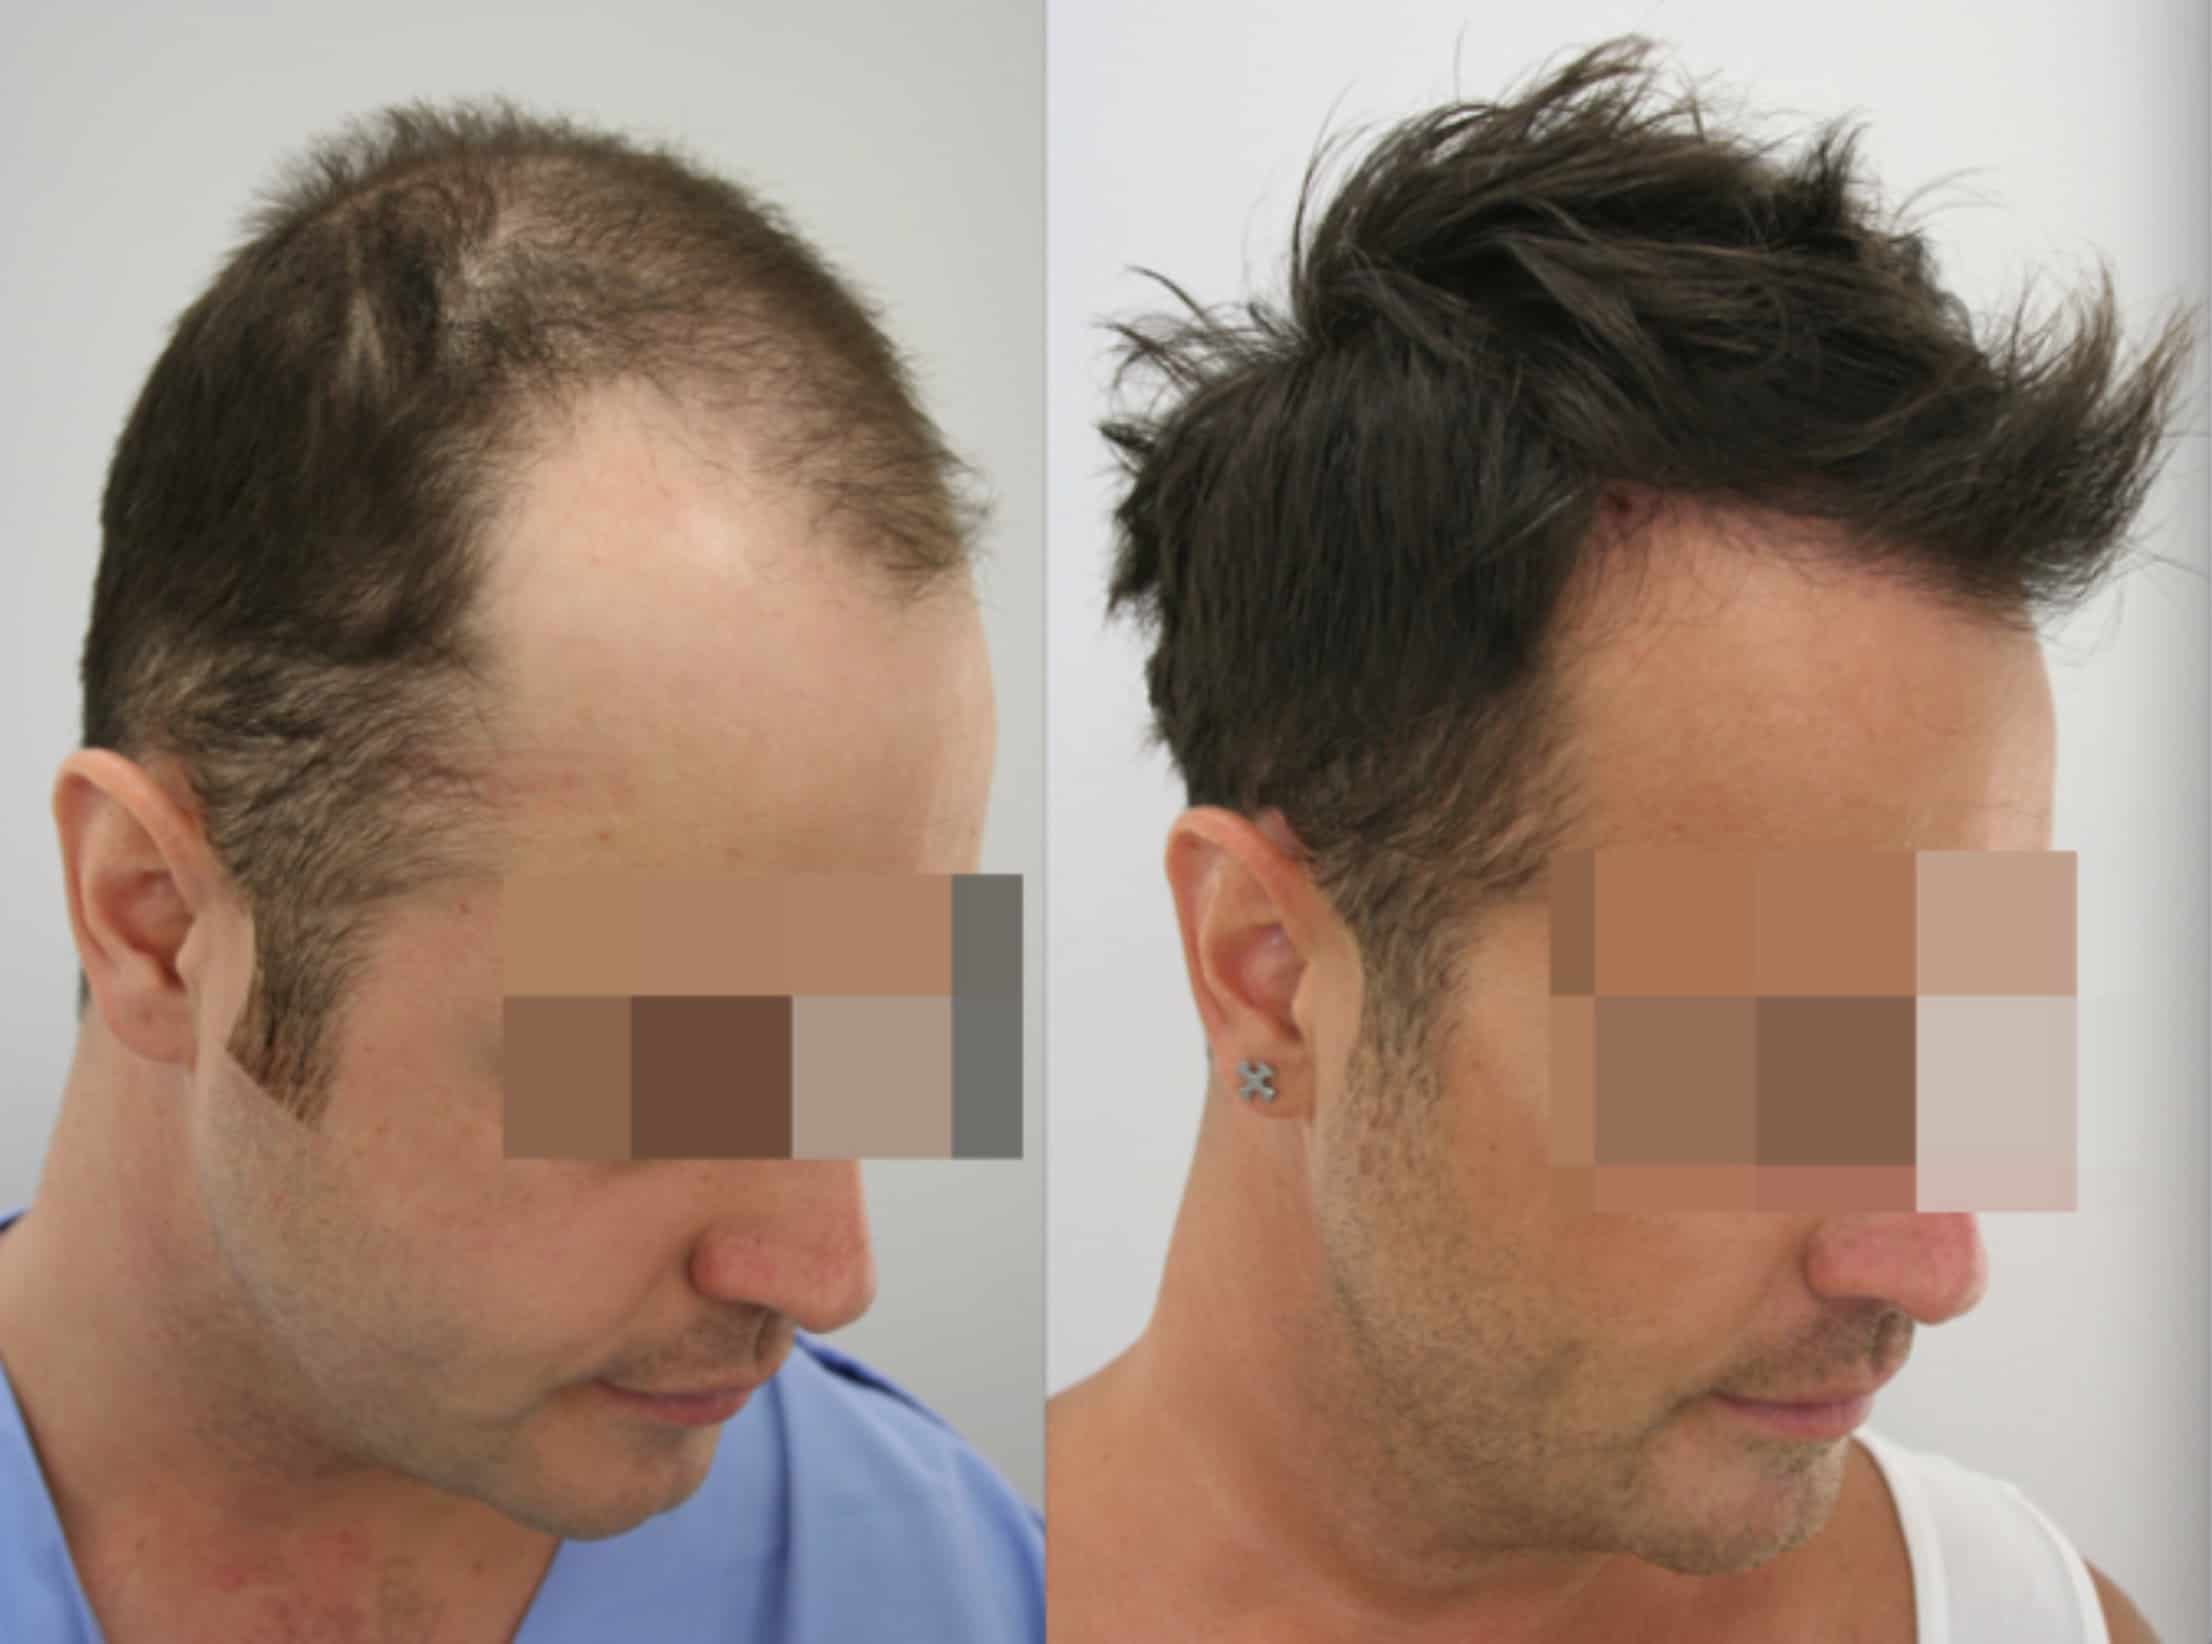 How much does a hair transplant cost - UK / London / Hungary / Turkey